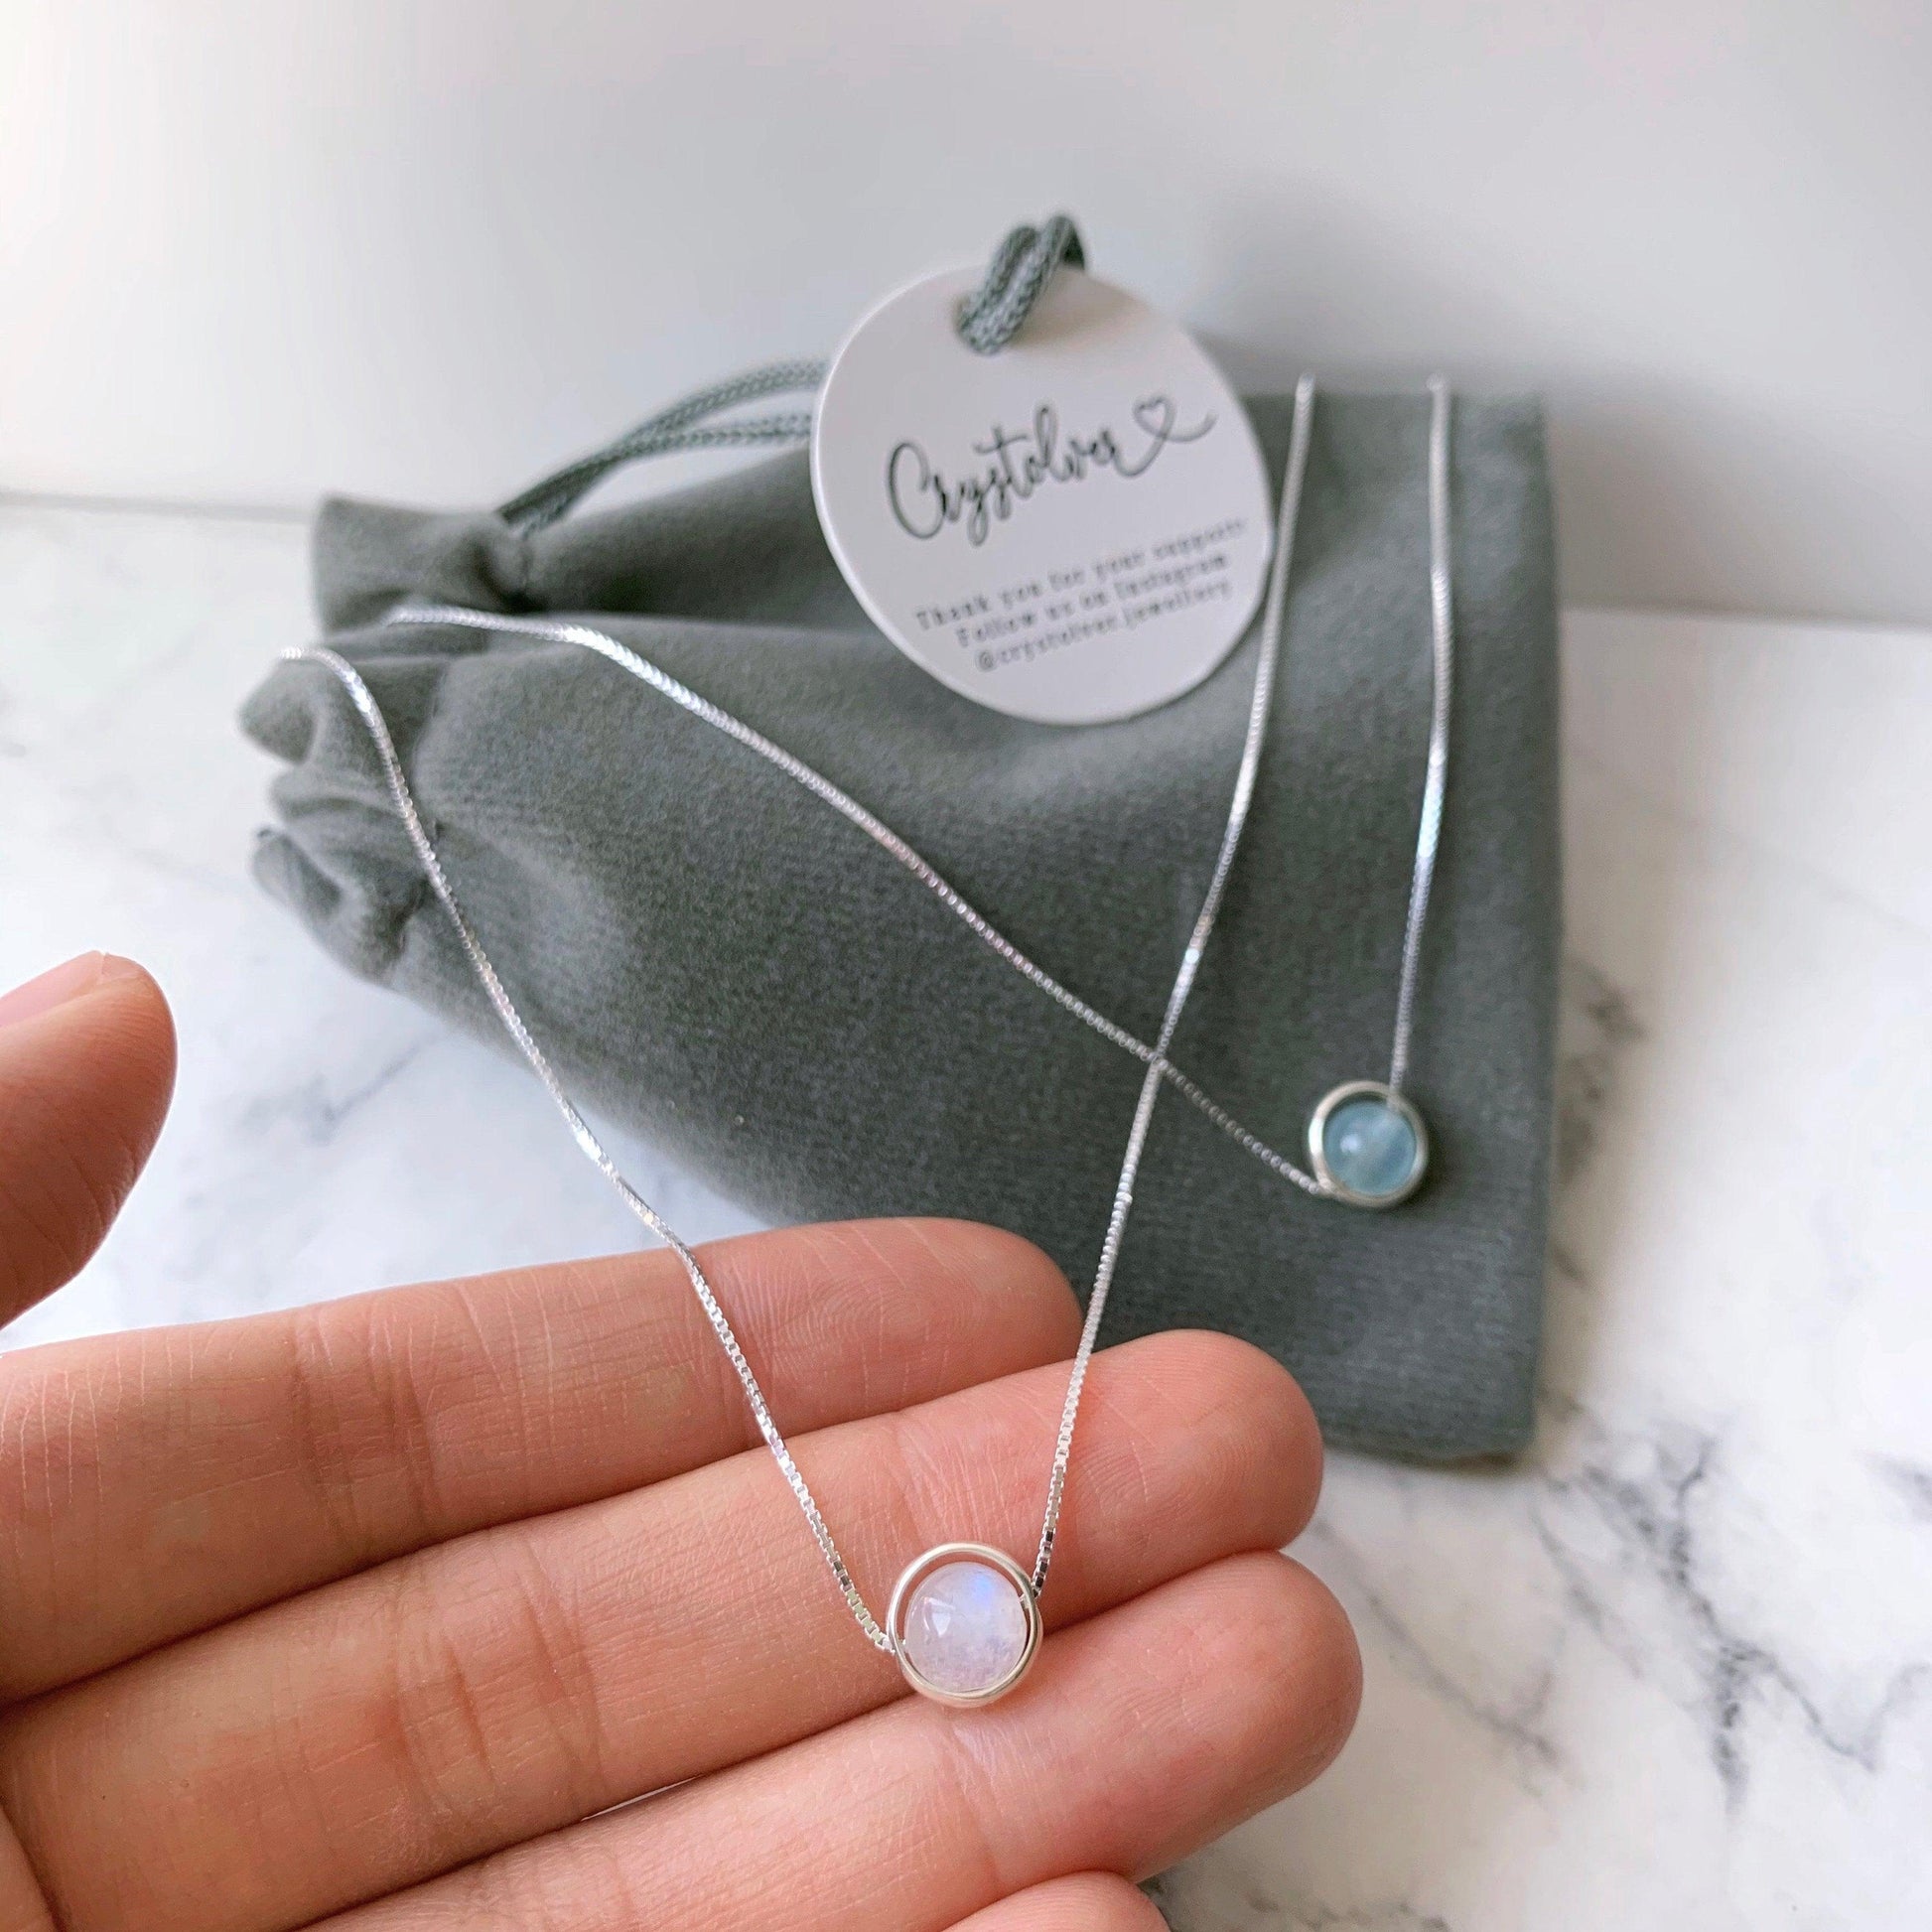 Minimalist Sterling Silver Gemstone Necklace - Crystolver | Healing Crystal Gift Shop